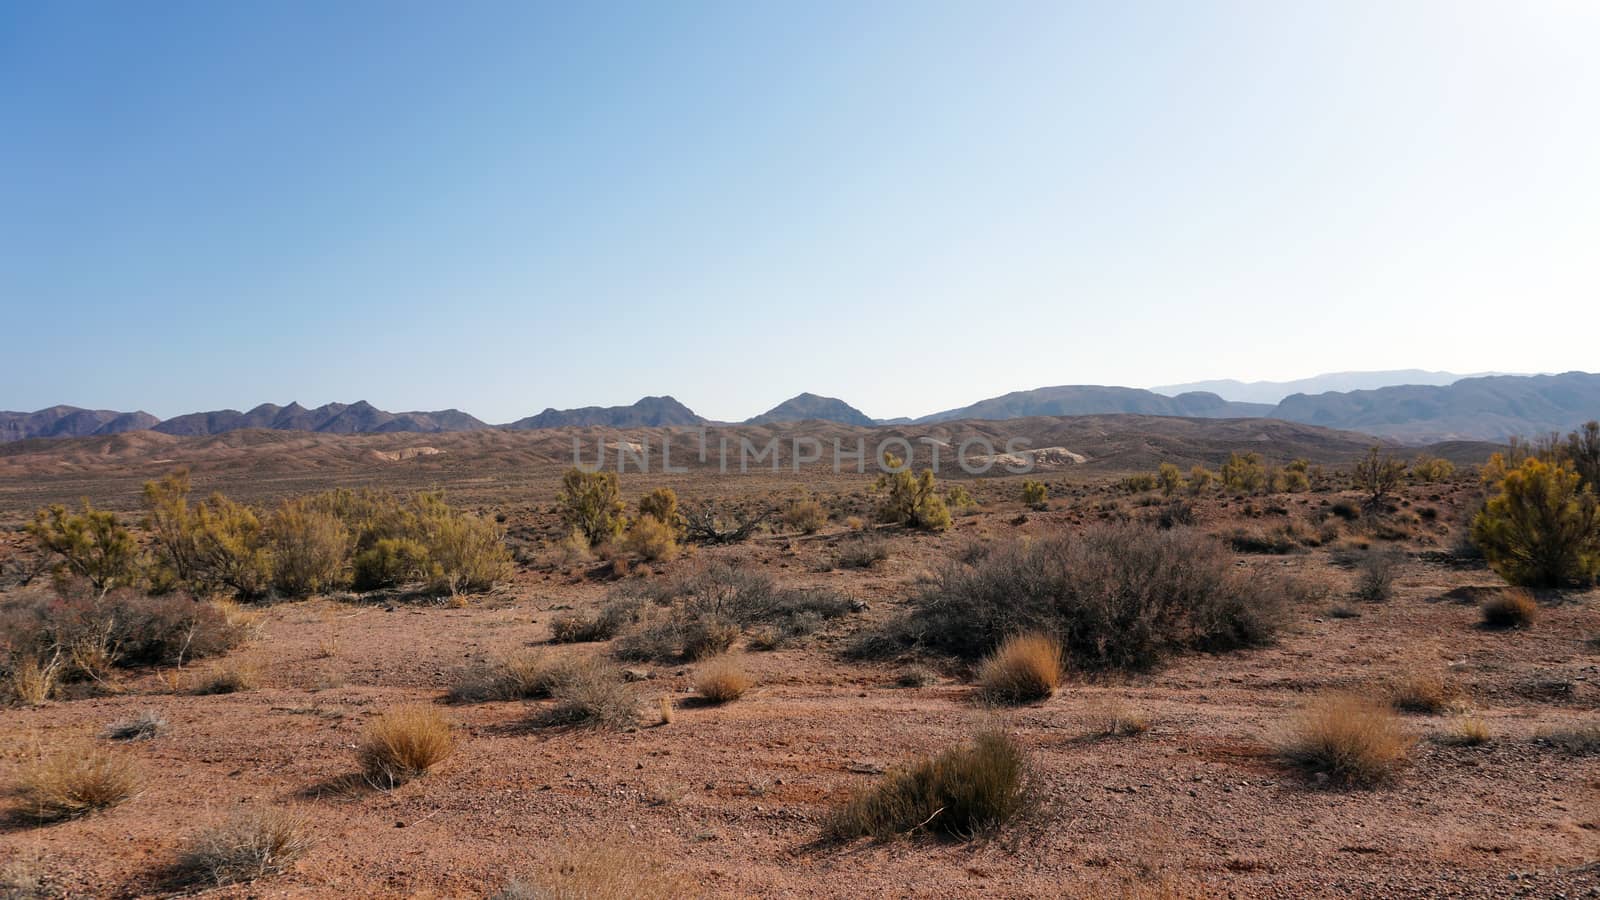 Autumn landscape of the steppe. View of dry bushes, small trees, sand with an orange-red hue, small stones, yellow-green trees. In the distance, you can see hills, clear blue sky and sun. Kazakhstan.